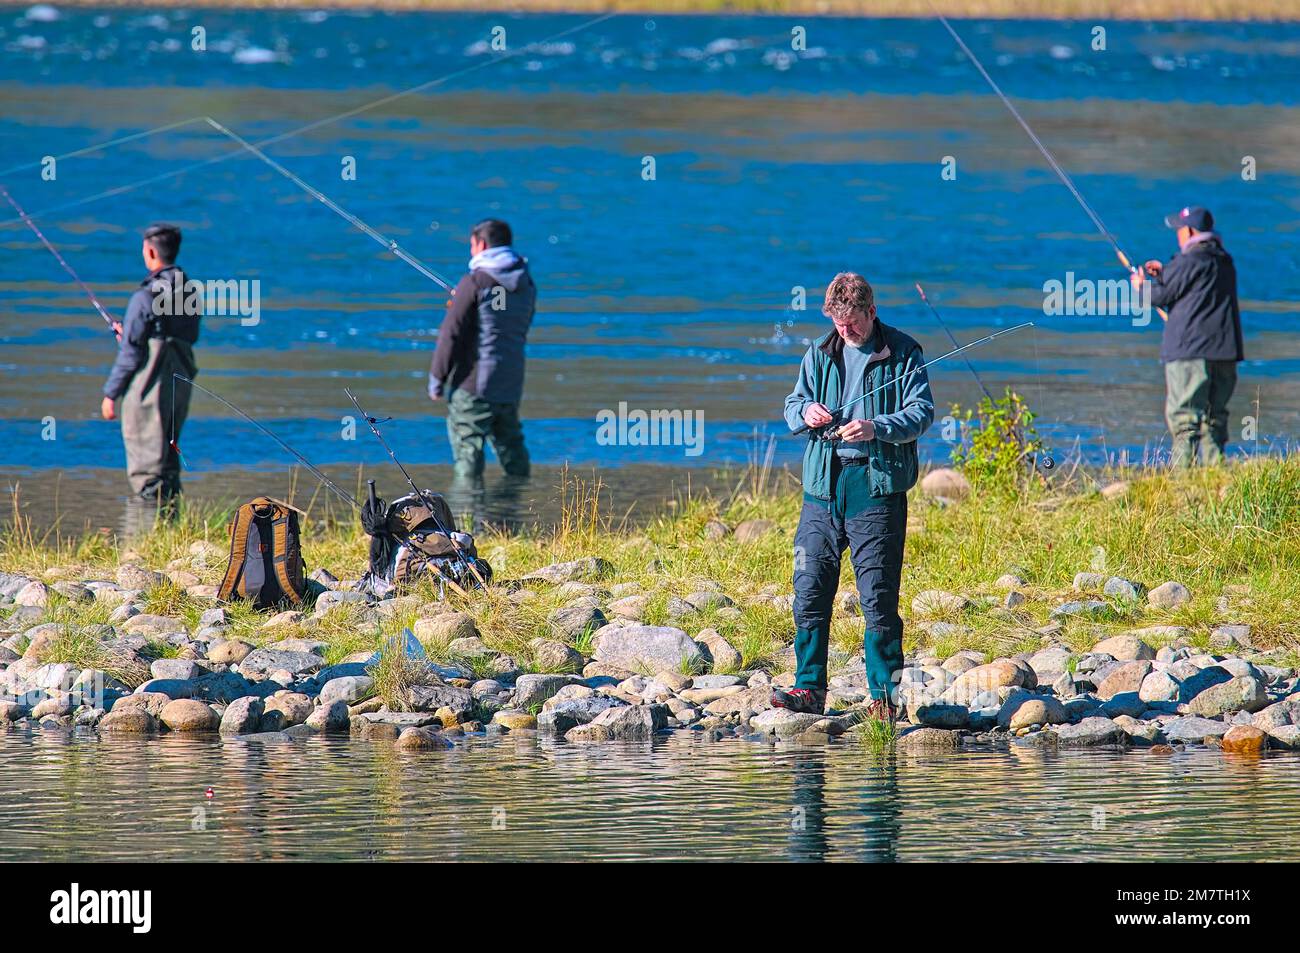 Fishermen with rods cast during a salmon run.  Metro Vancouver, British Columbia, Canada. November 2020. Stock Photo